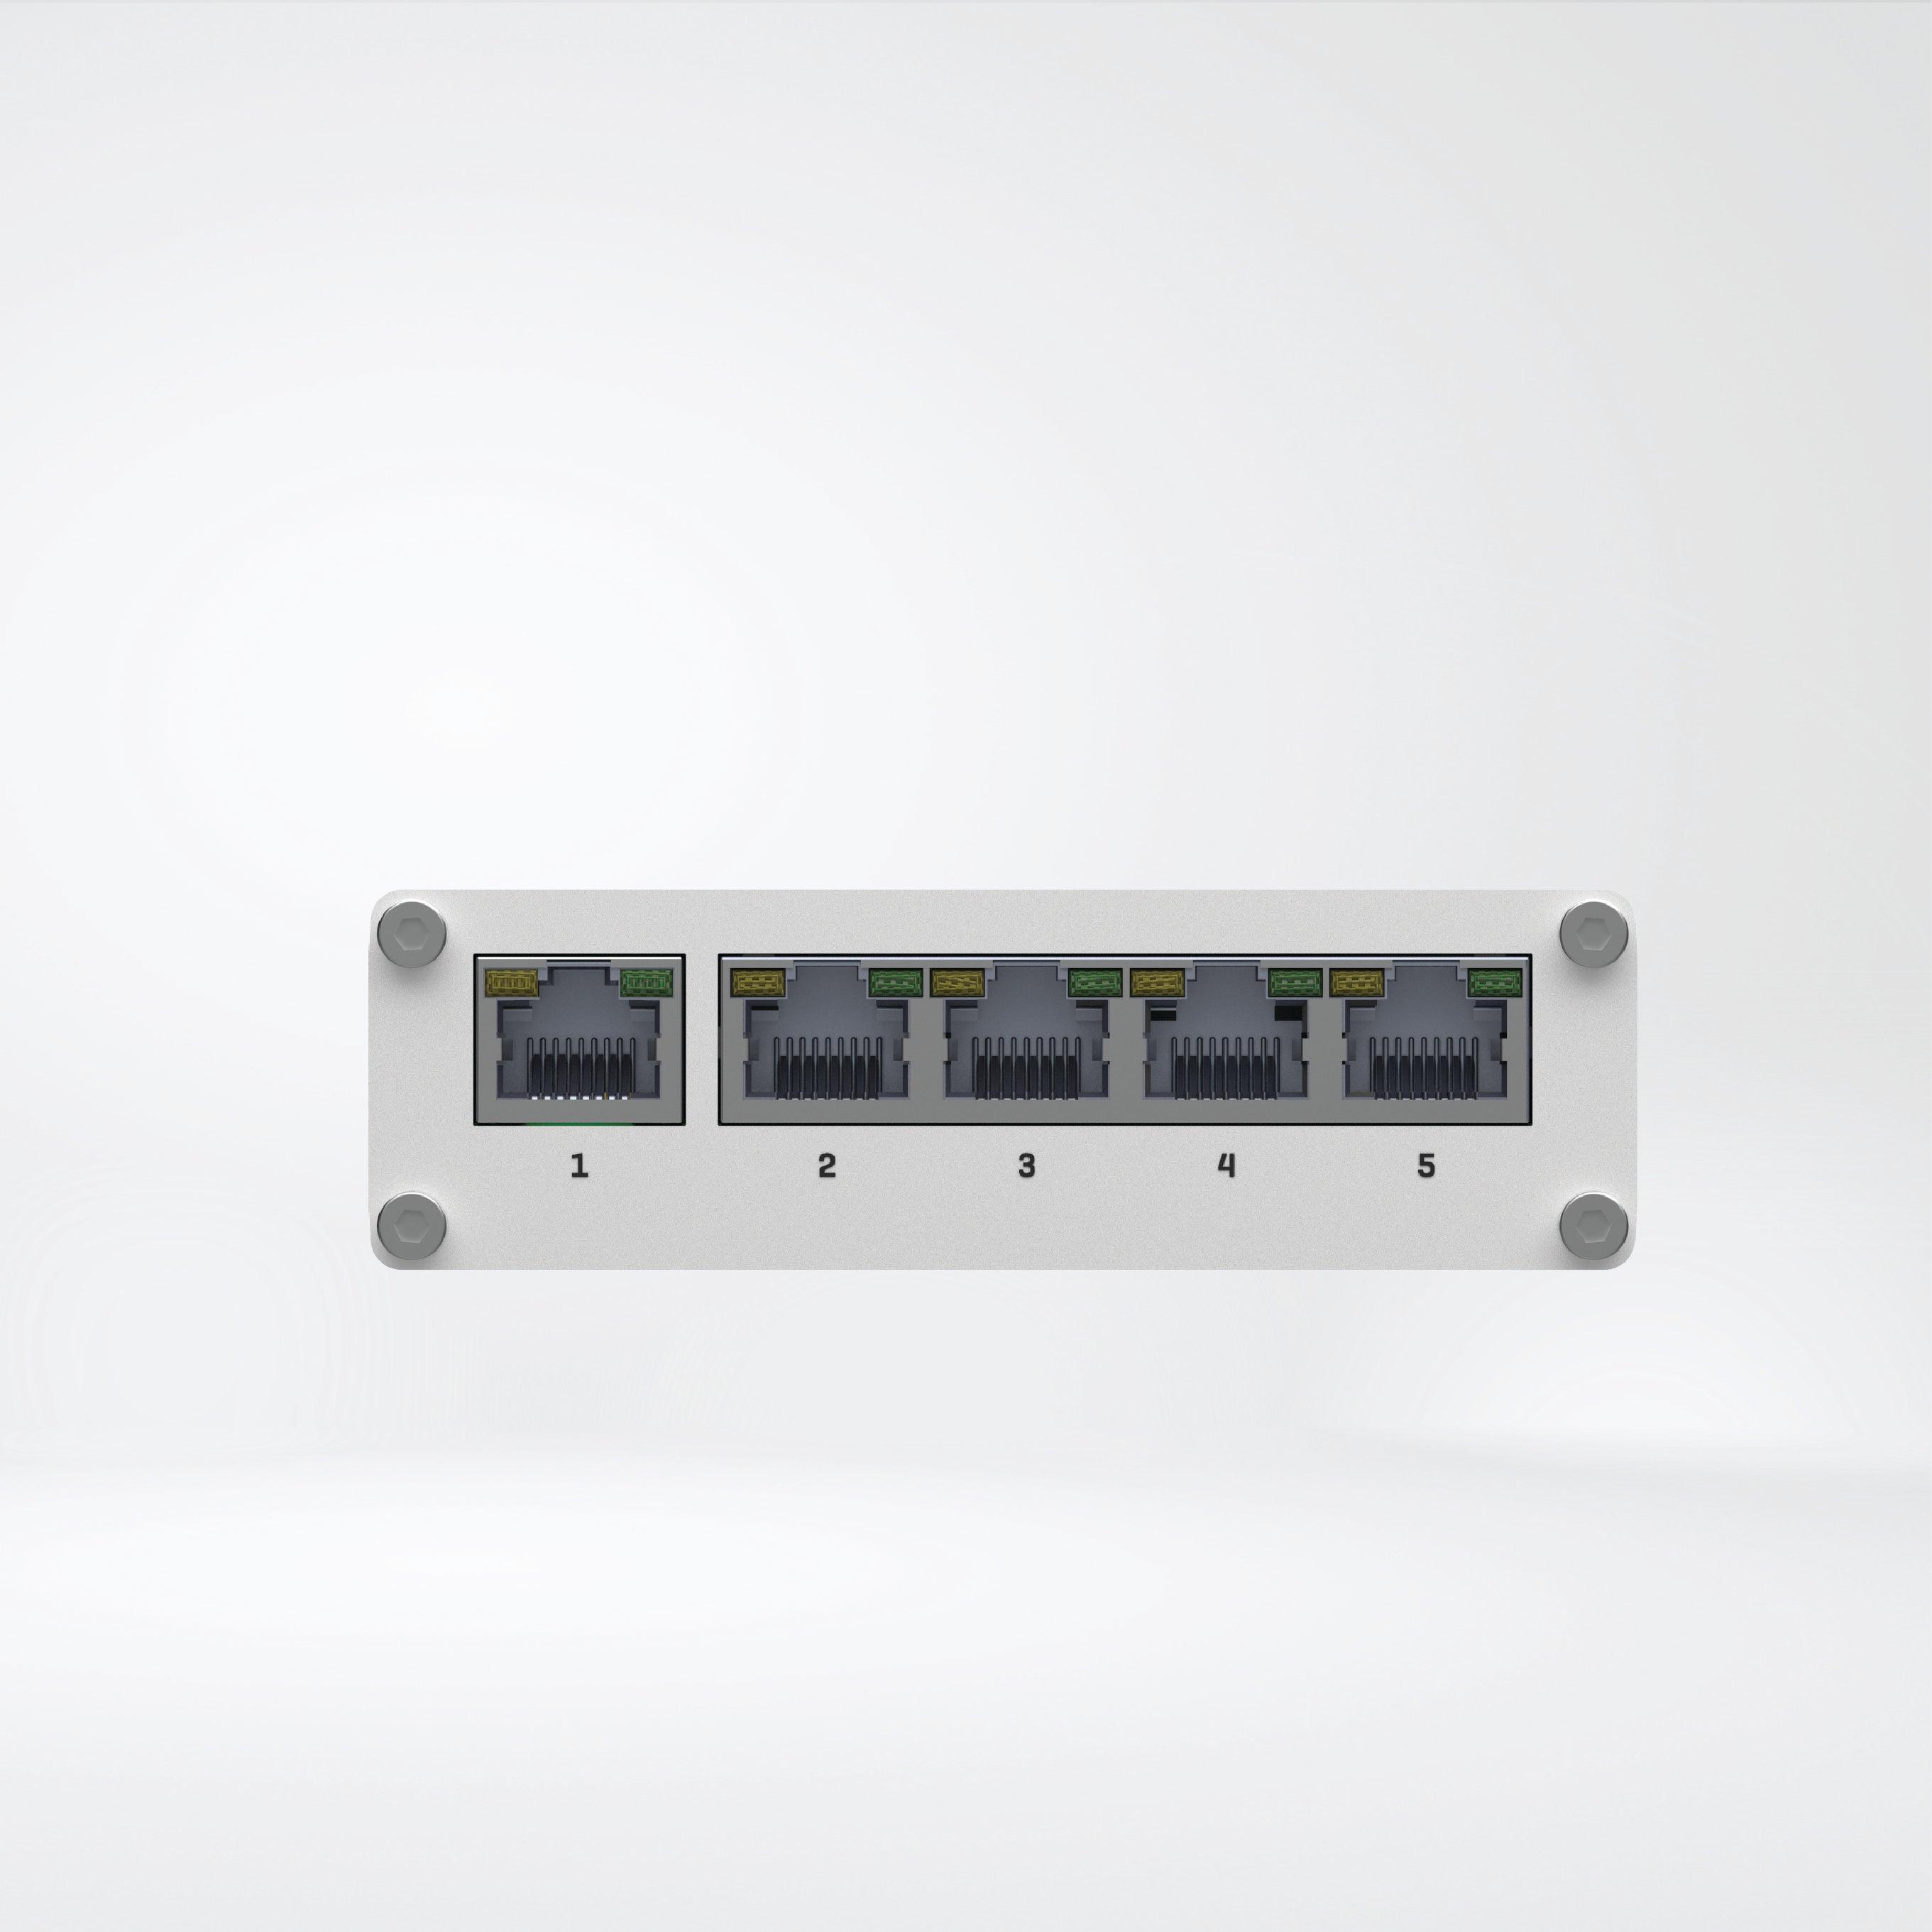 TSW110 Industrial Unmanaged Switch - Riverplus